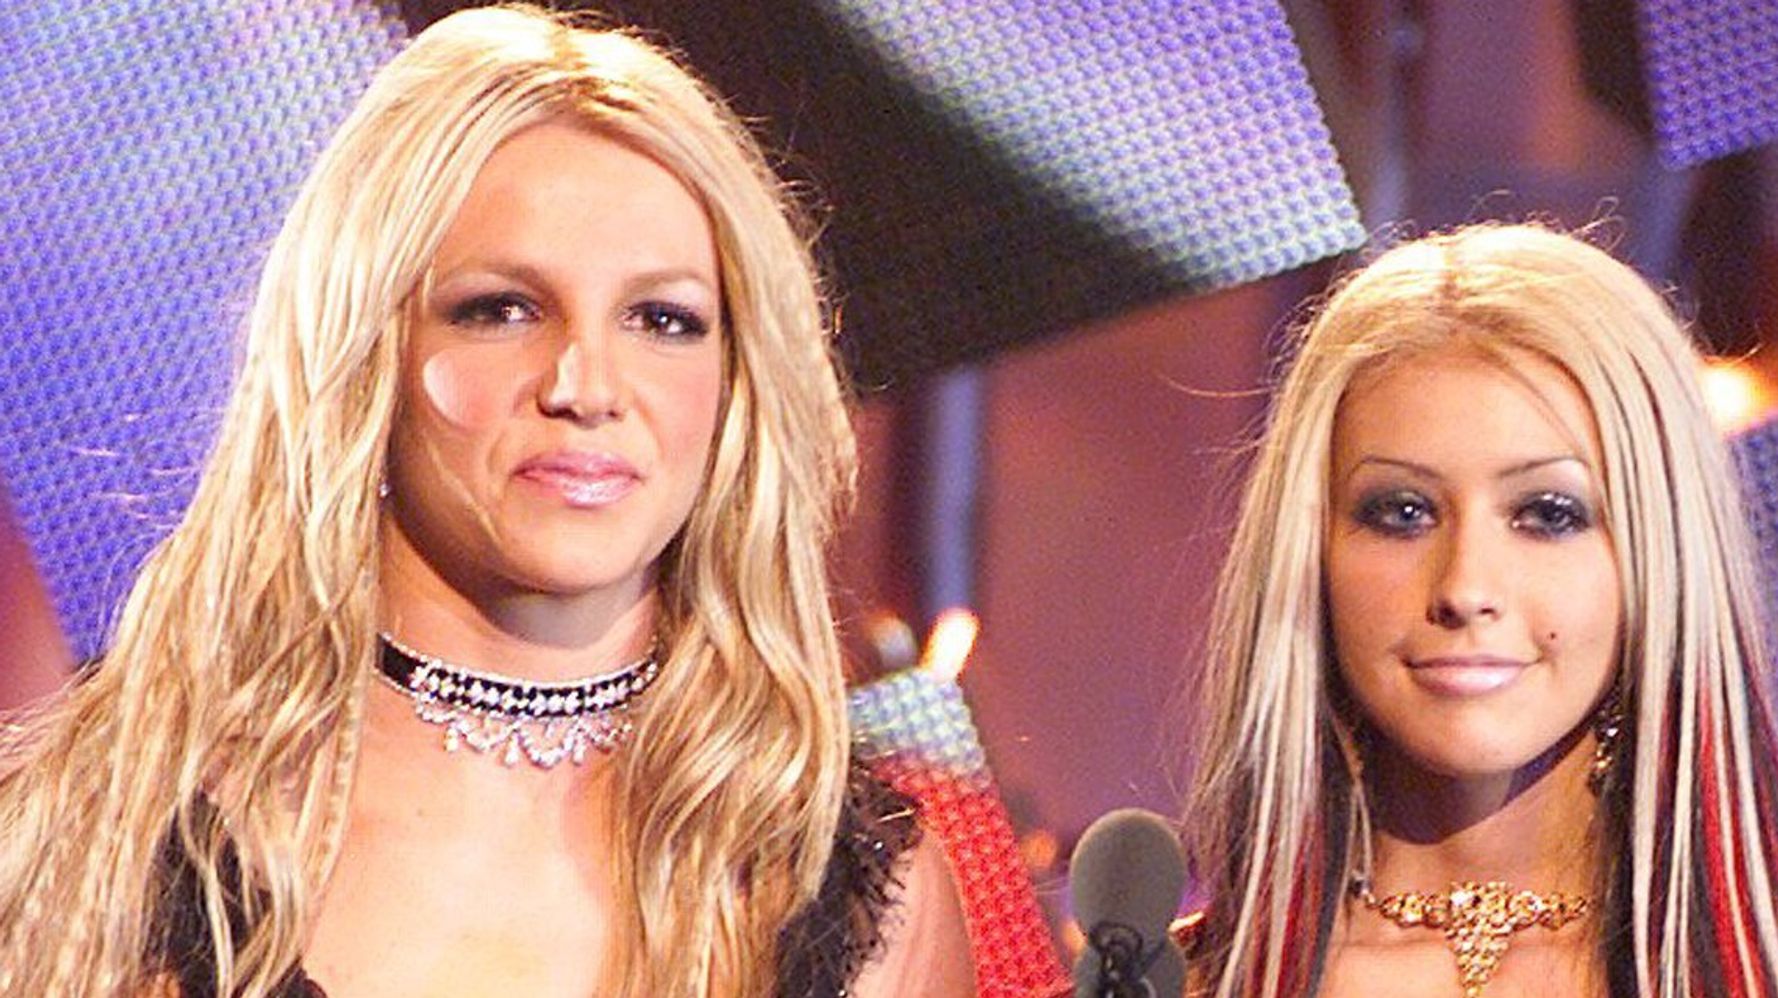 Britney Spears Calls Out Christina Aguilera For Ducking Question About Conservatorship